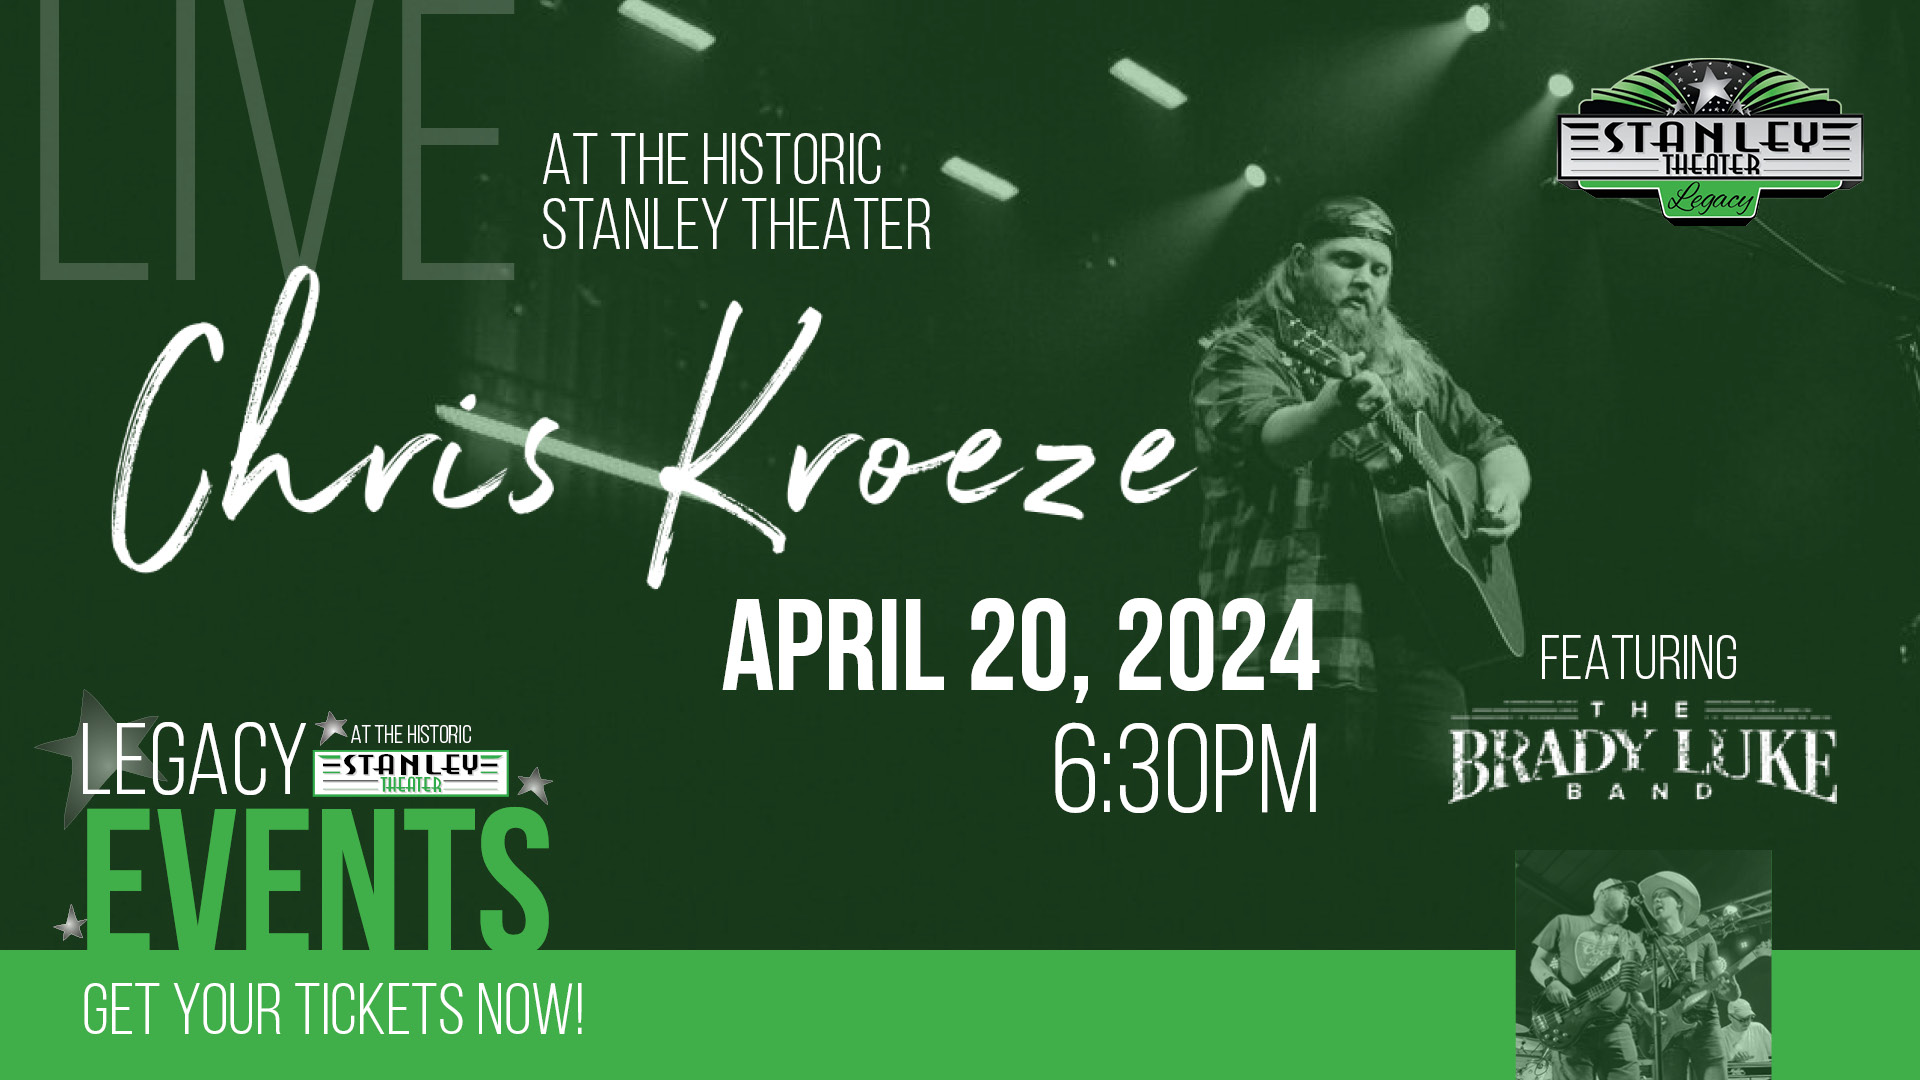 Stanley Theater Legacy Events - Chris Krosze Poster 1920x1080 0224